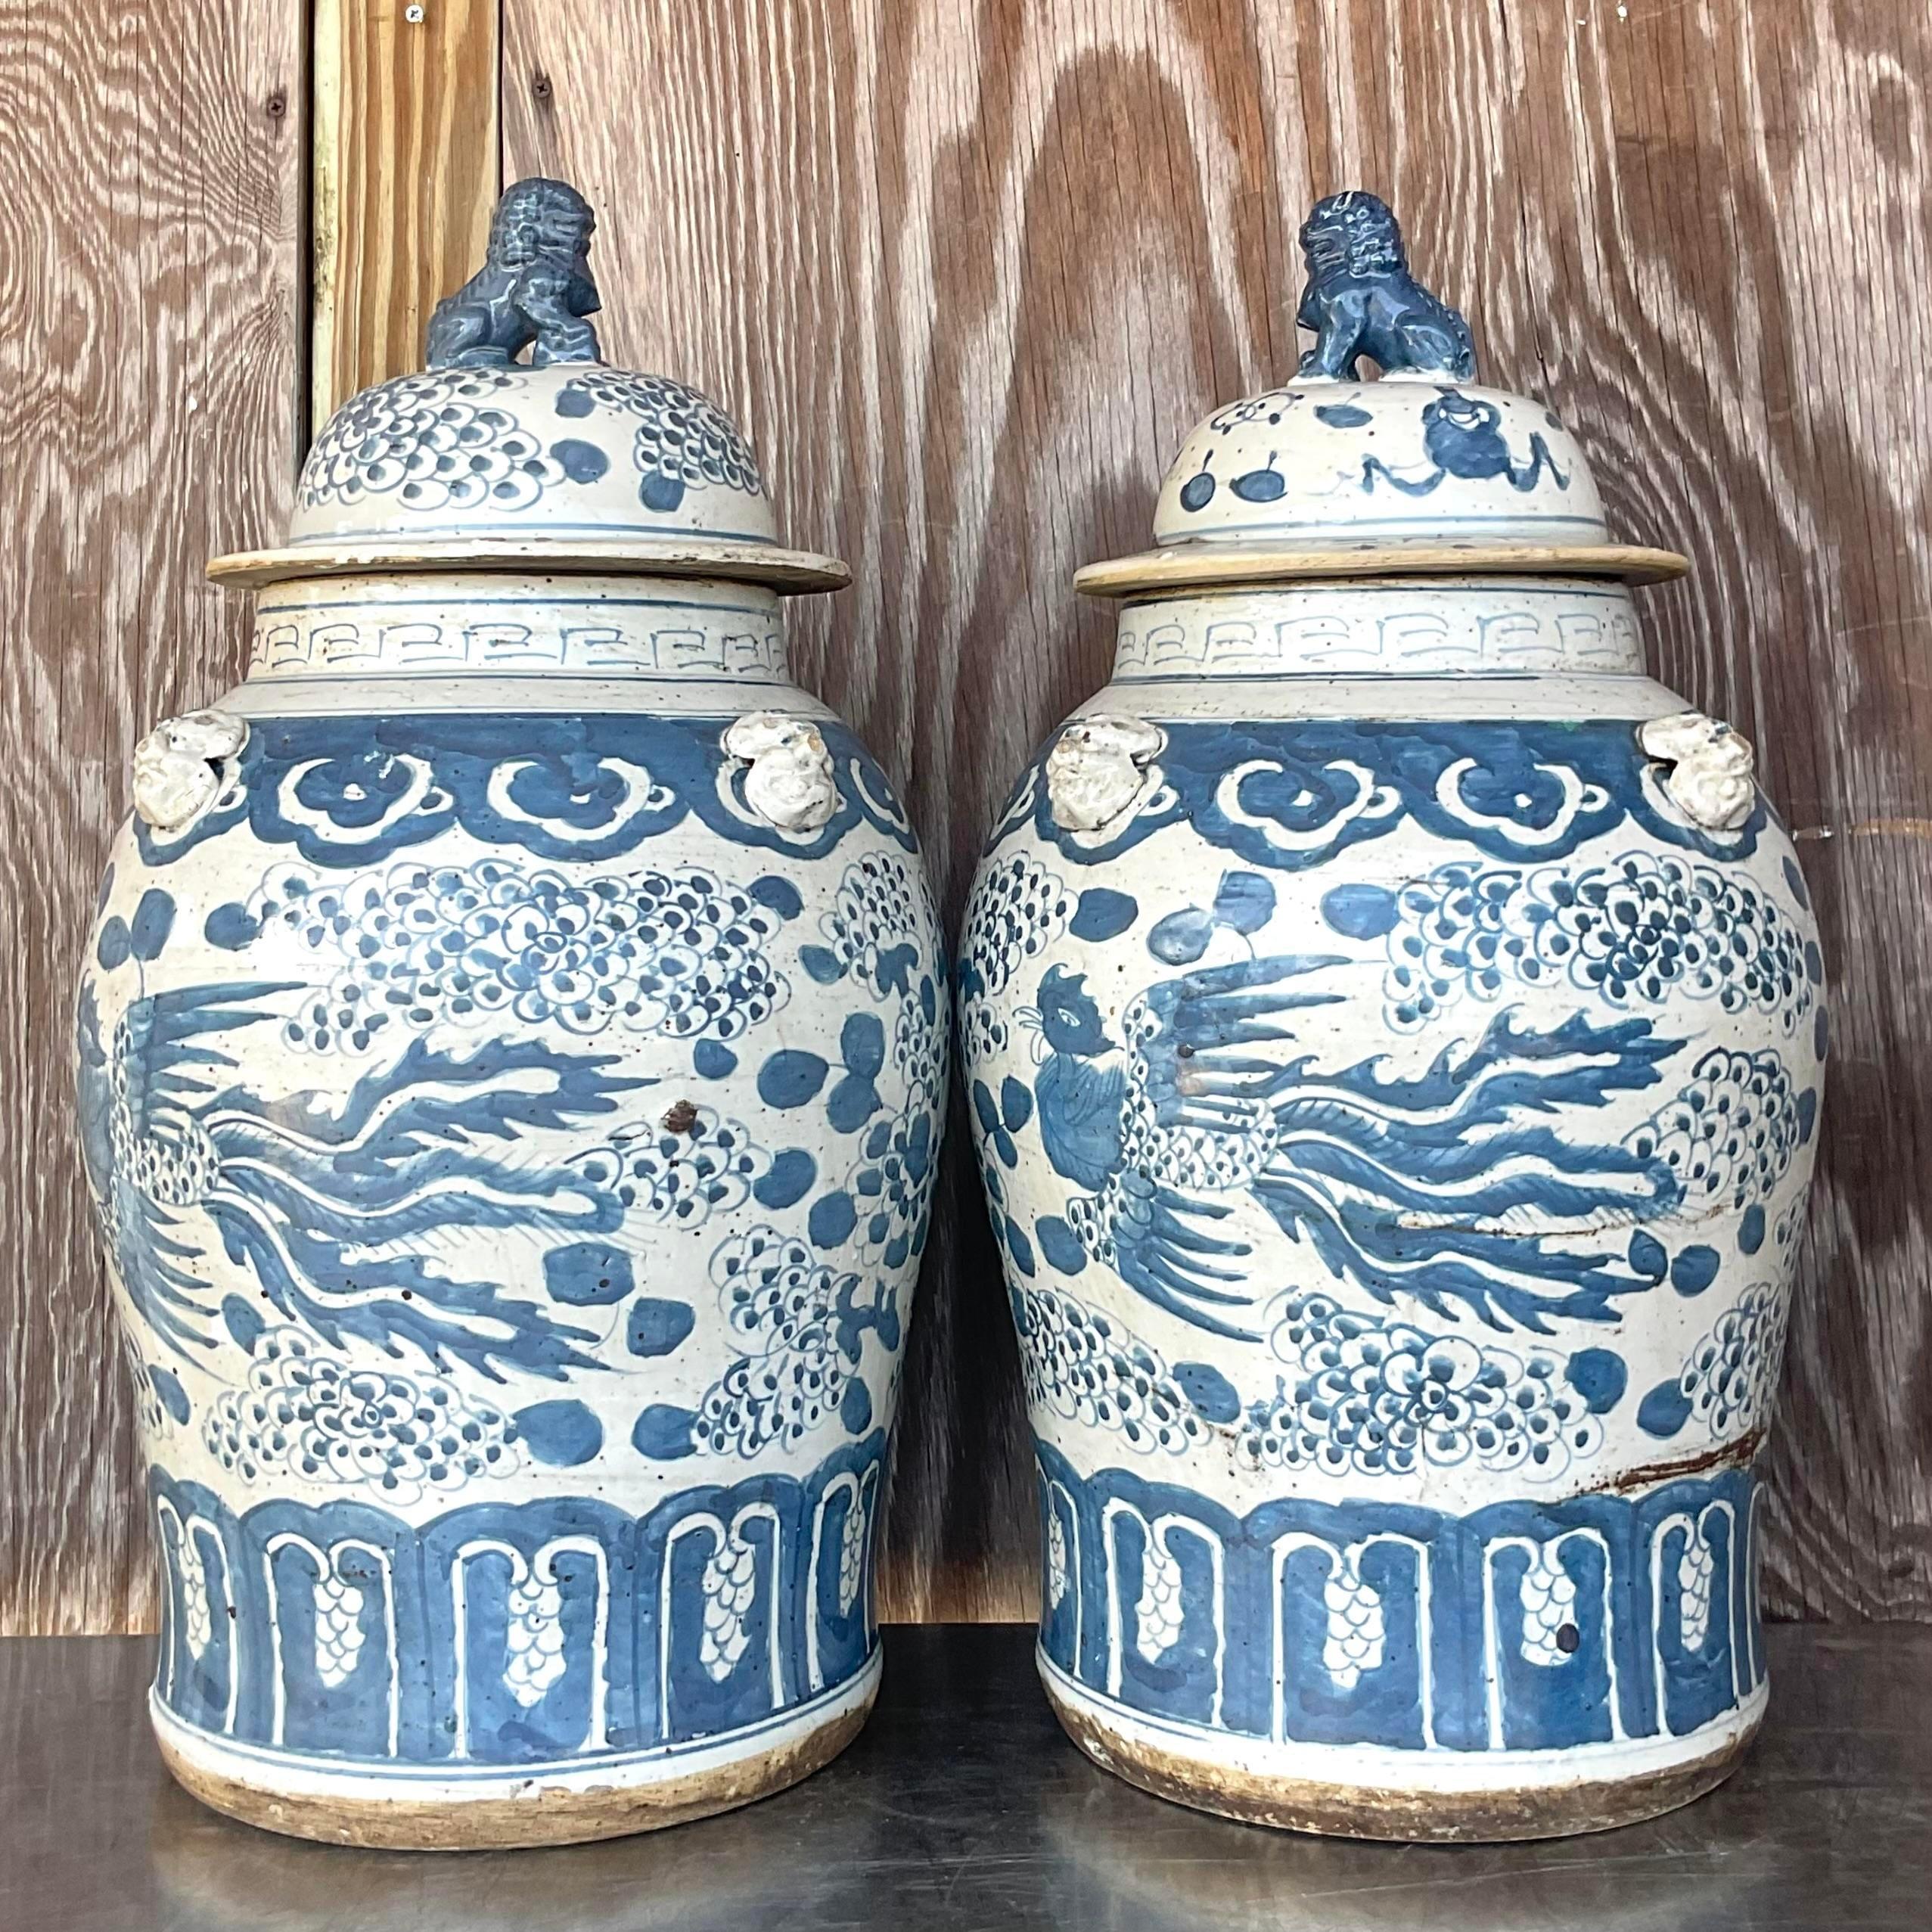 Infuse your space with exotic elegance using our Vintage Asian Hand-Painted Phoenix Ginger Jar - A Pair. Handcrafted with intricate detailing, these jars evoke the mystique of the Orient while seamlessly complementing American decor. Elevate your